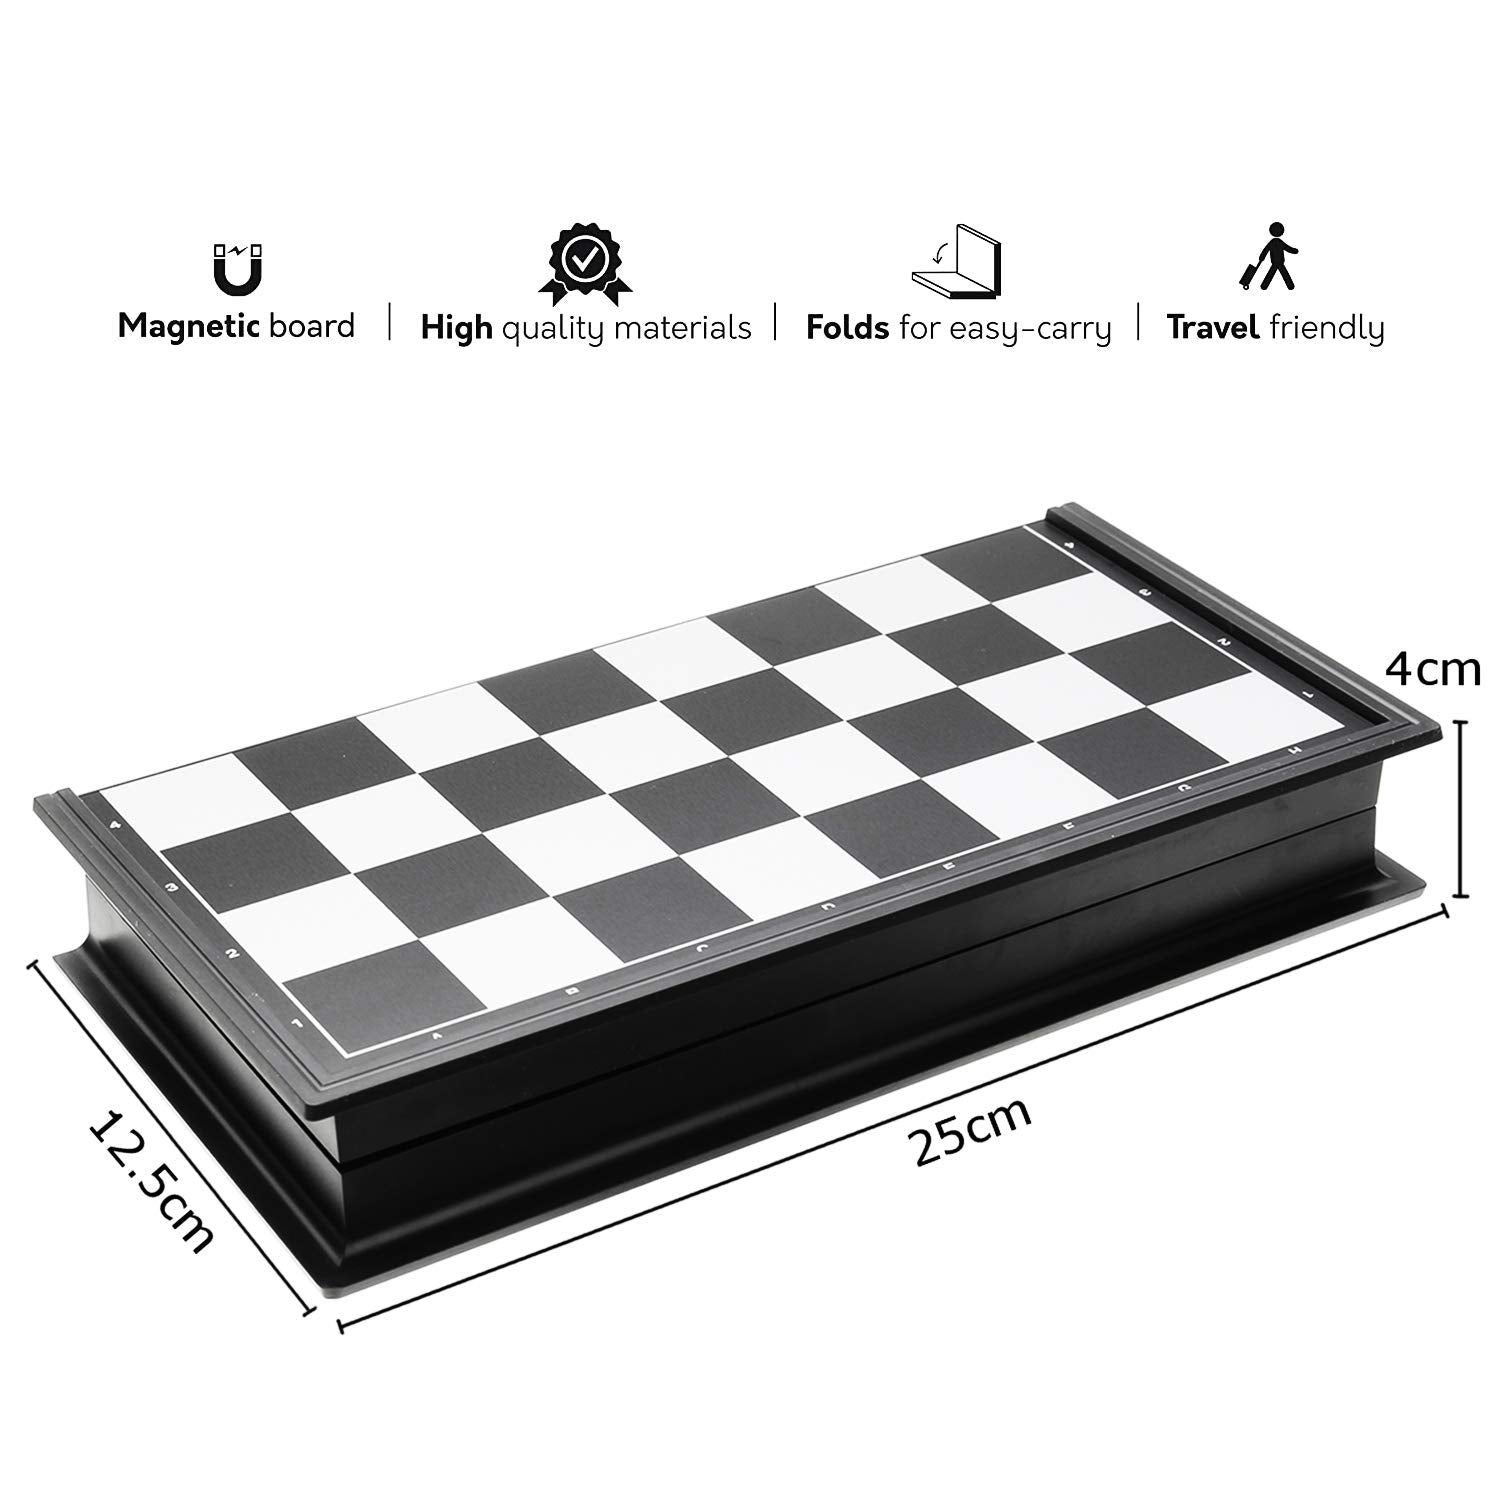 Kids Mandi magnetic travel chess set for educational fun and learning.